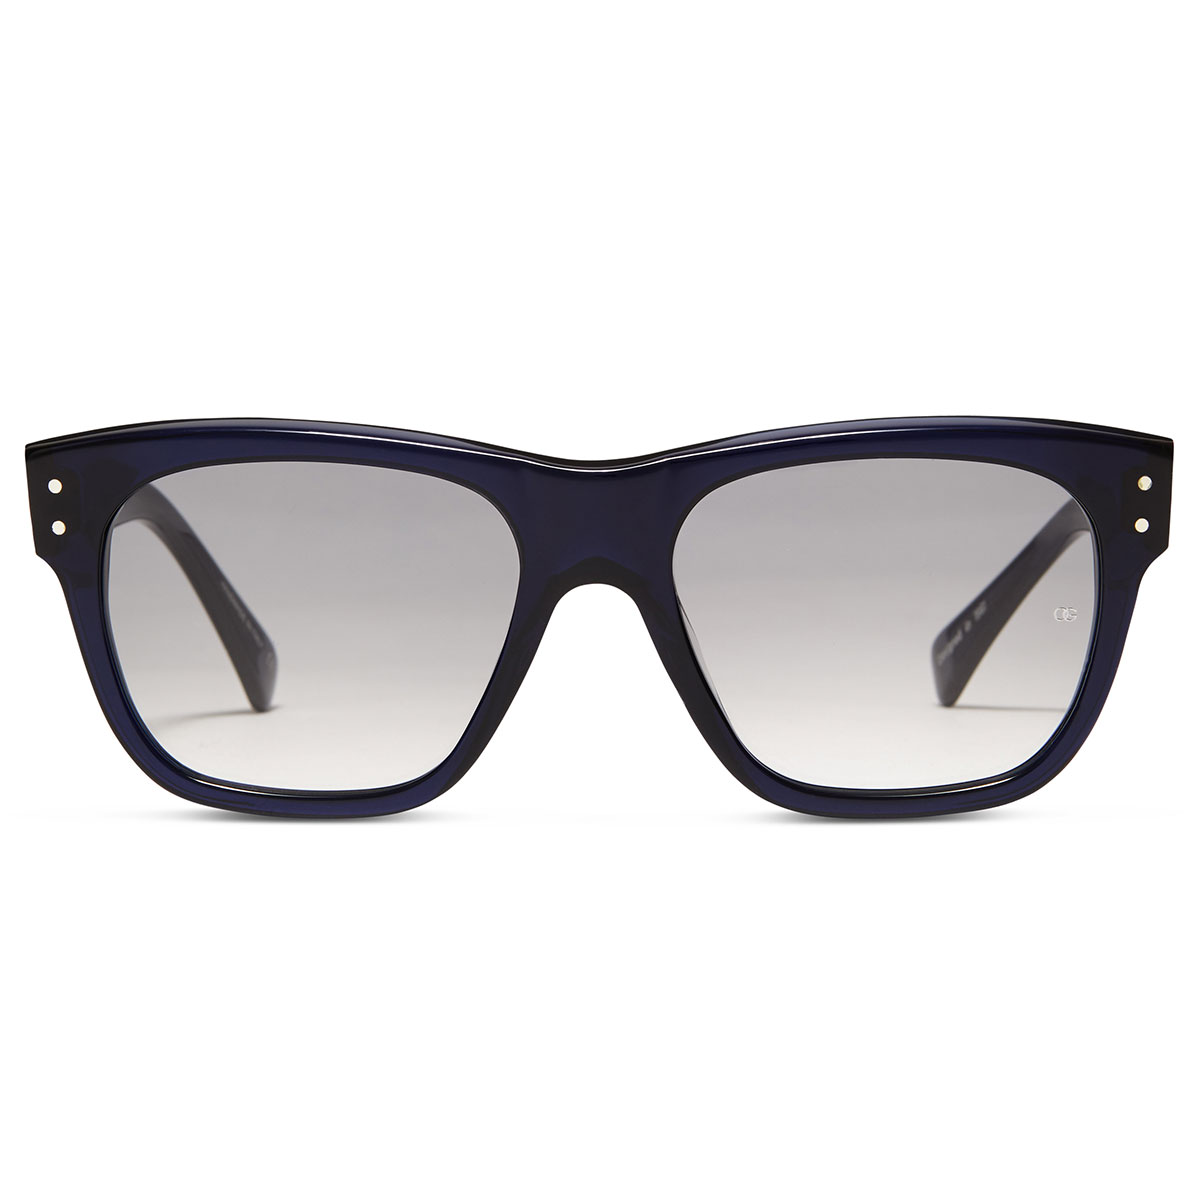 Lord WS Sunglasses with Night Sea acetate frame